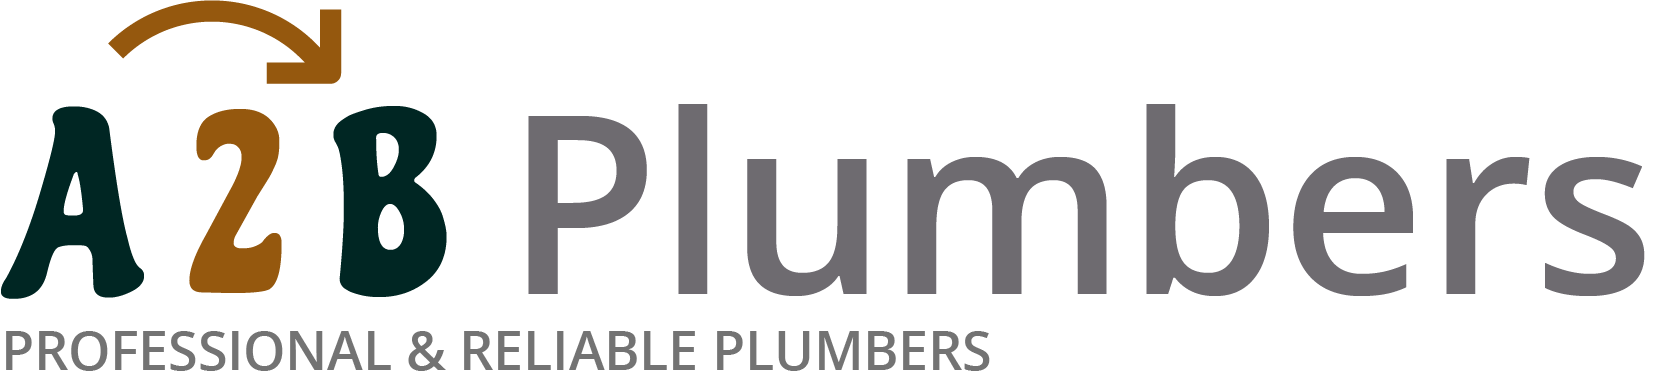 If you need a boiler installed, a radiator repaired or a leaking tap fixed, call us now - we provide services for properties in Buxton and the local area.